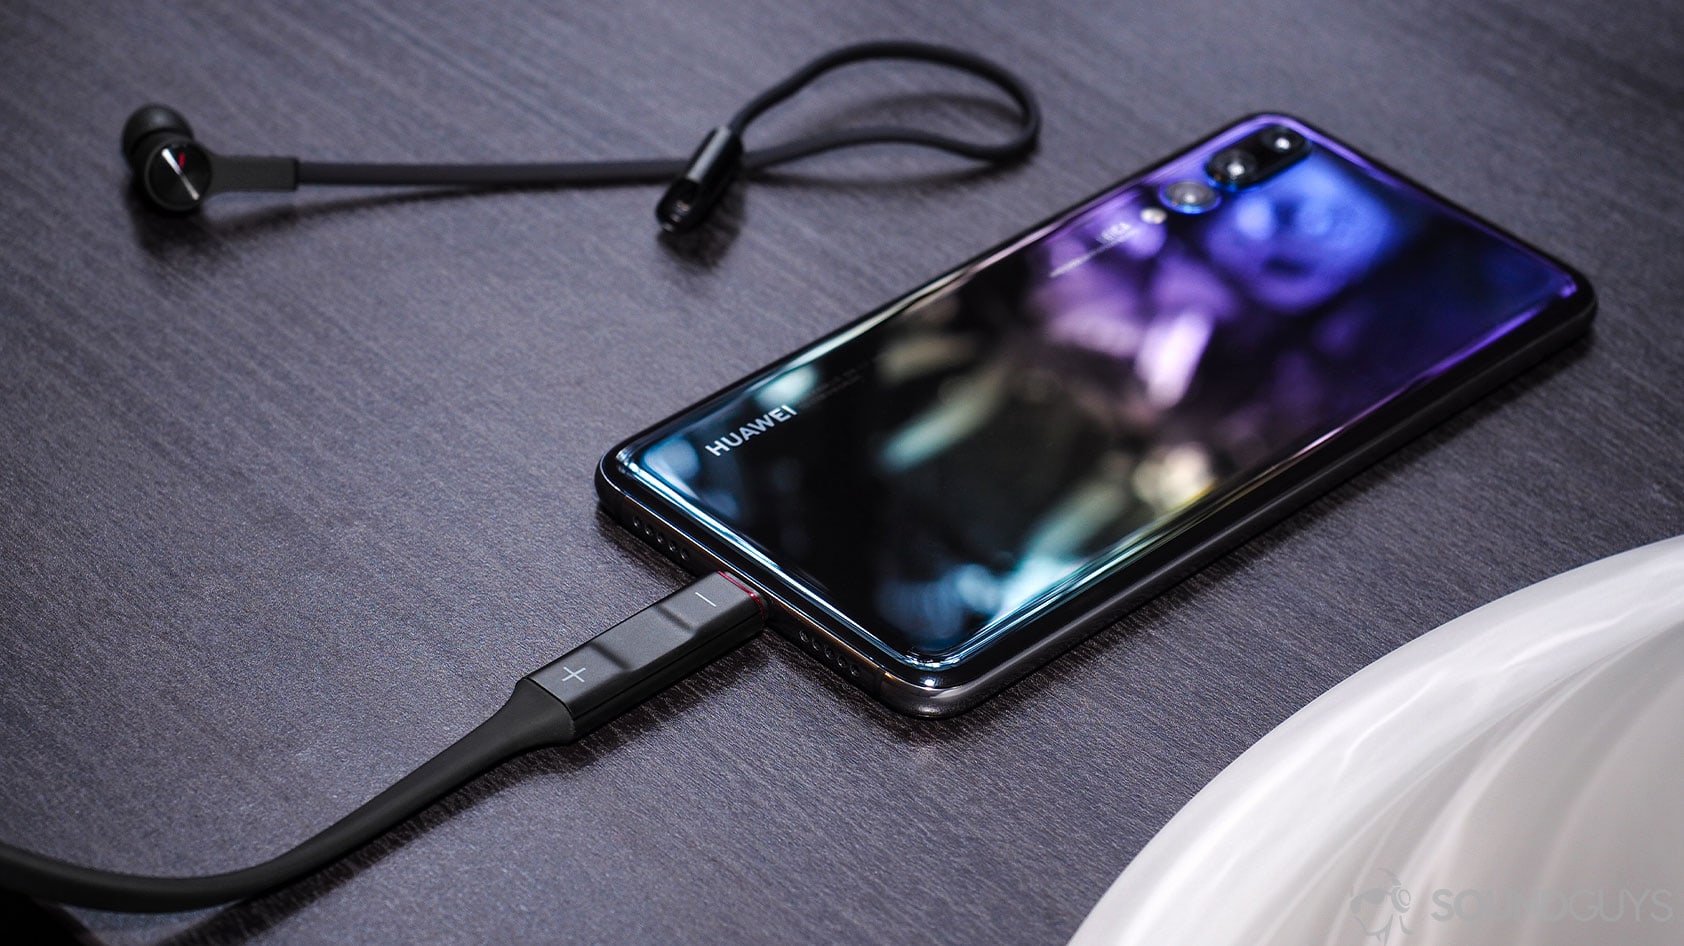 Huawei Freelace: Right earbud detached from the neckband which is plugged into a Huawei P20 smartphone via the USB-C plug.